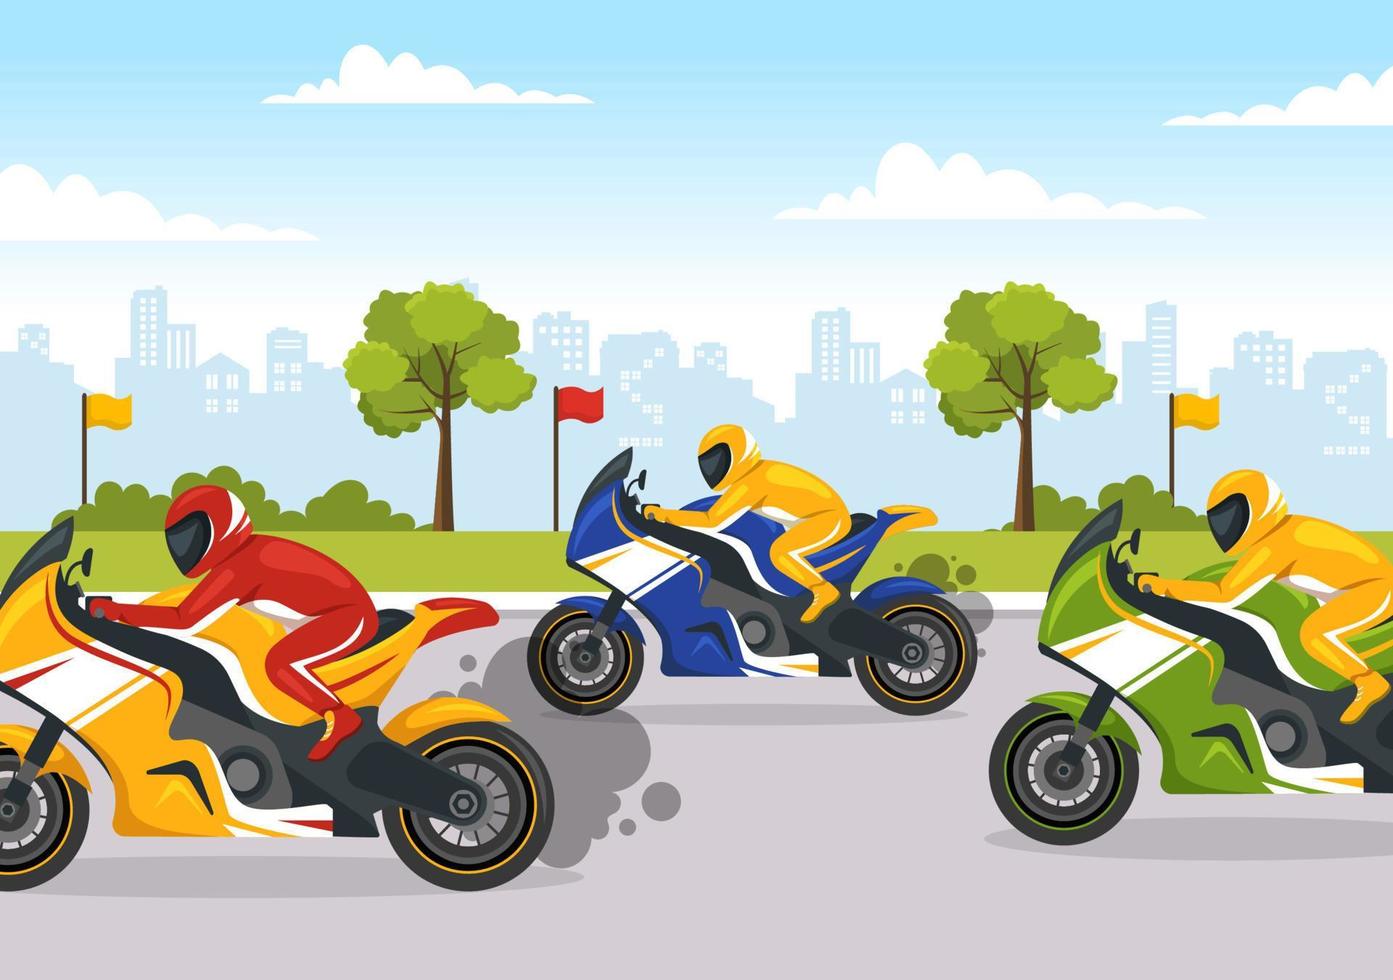 Motorcycle Racing Championship on the Racetrack Illustration with Racer Riding Motor for Landing Page in Flat Cartoon Hand Drawn Templates vector